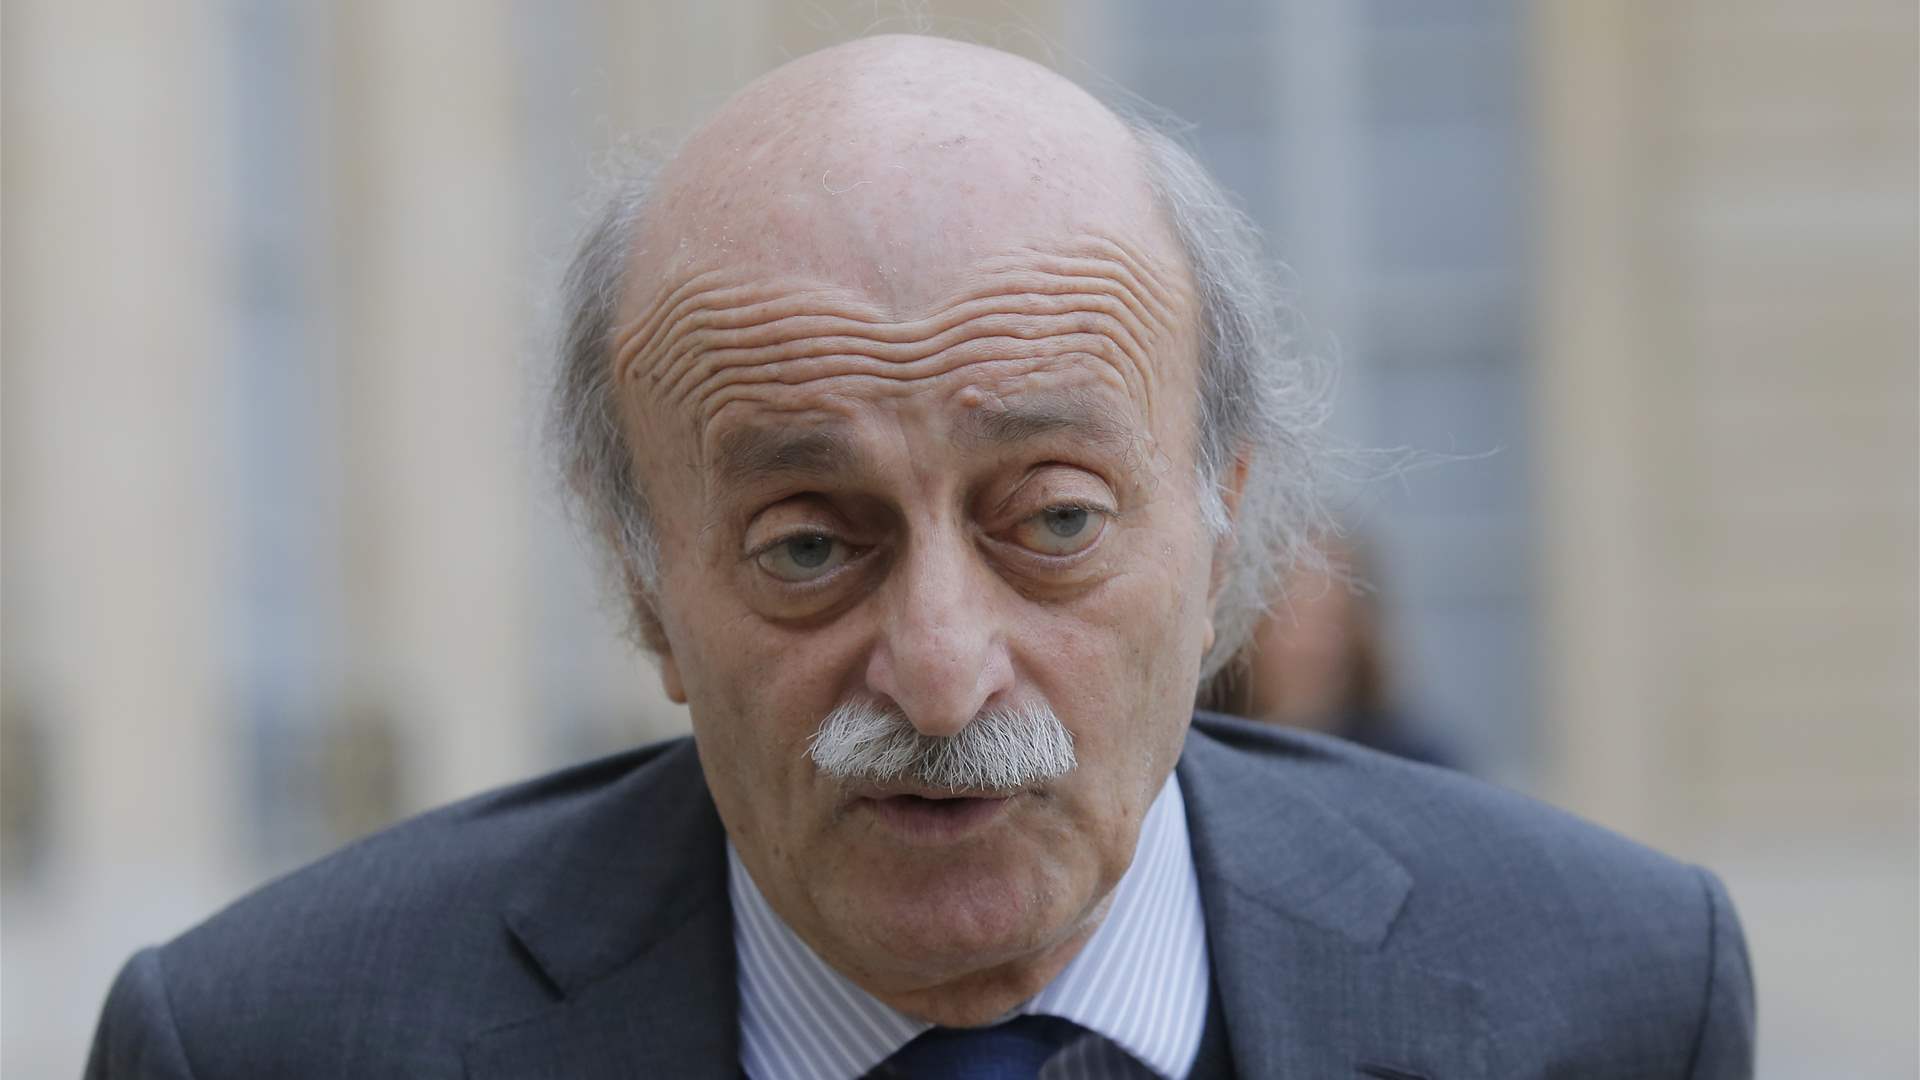 Jumblatt after meeting Berri: We hope that Lebanon stays out of this circle, but there is continuous aggression from Israel